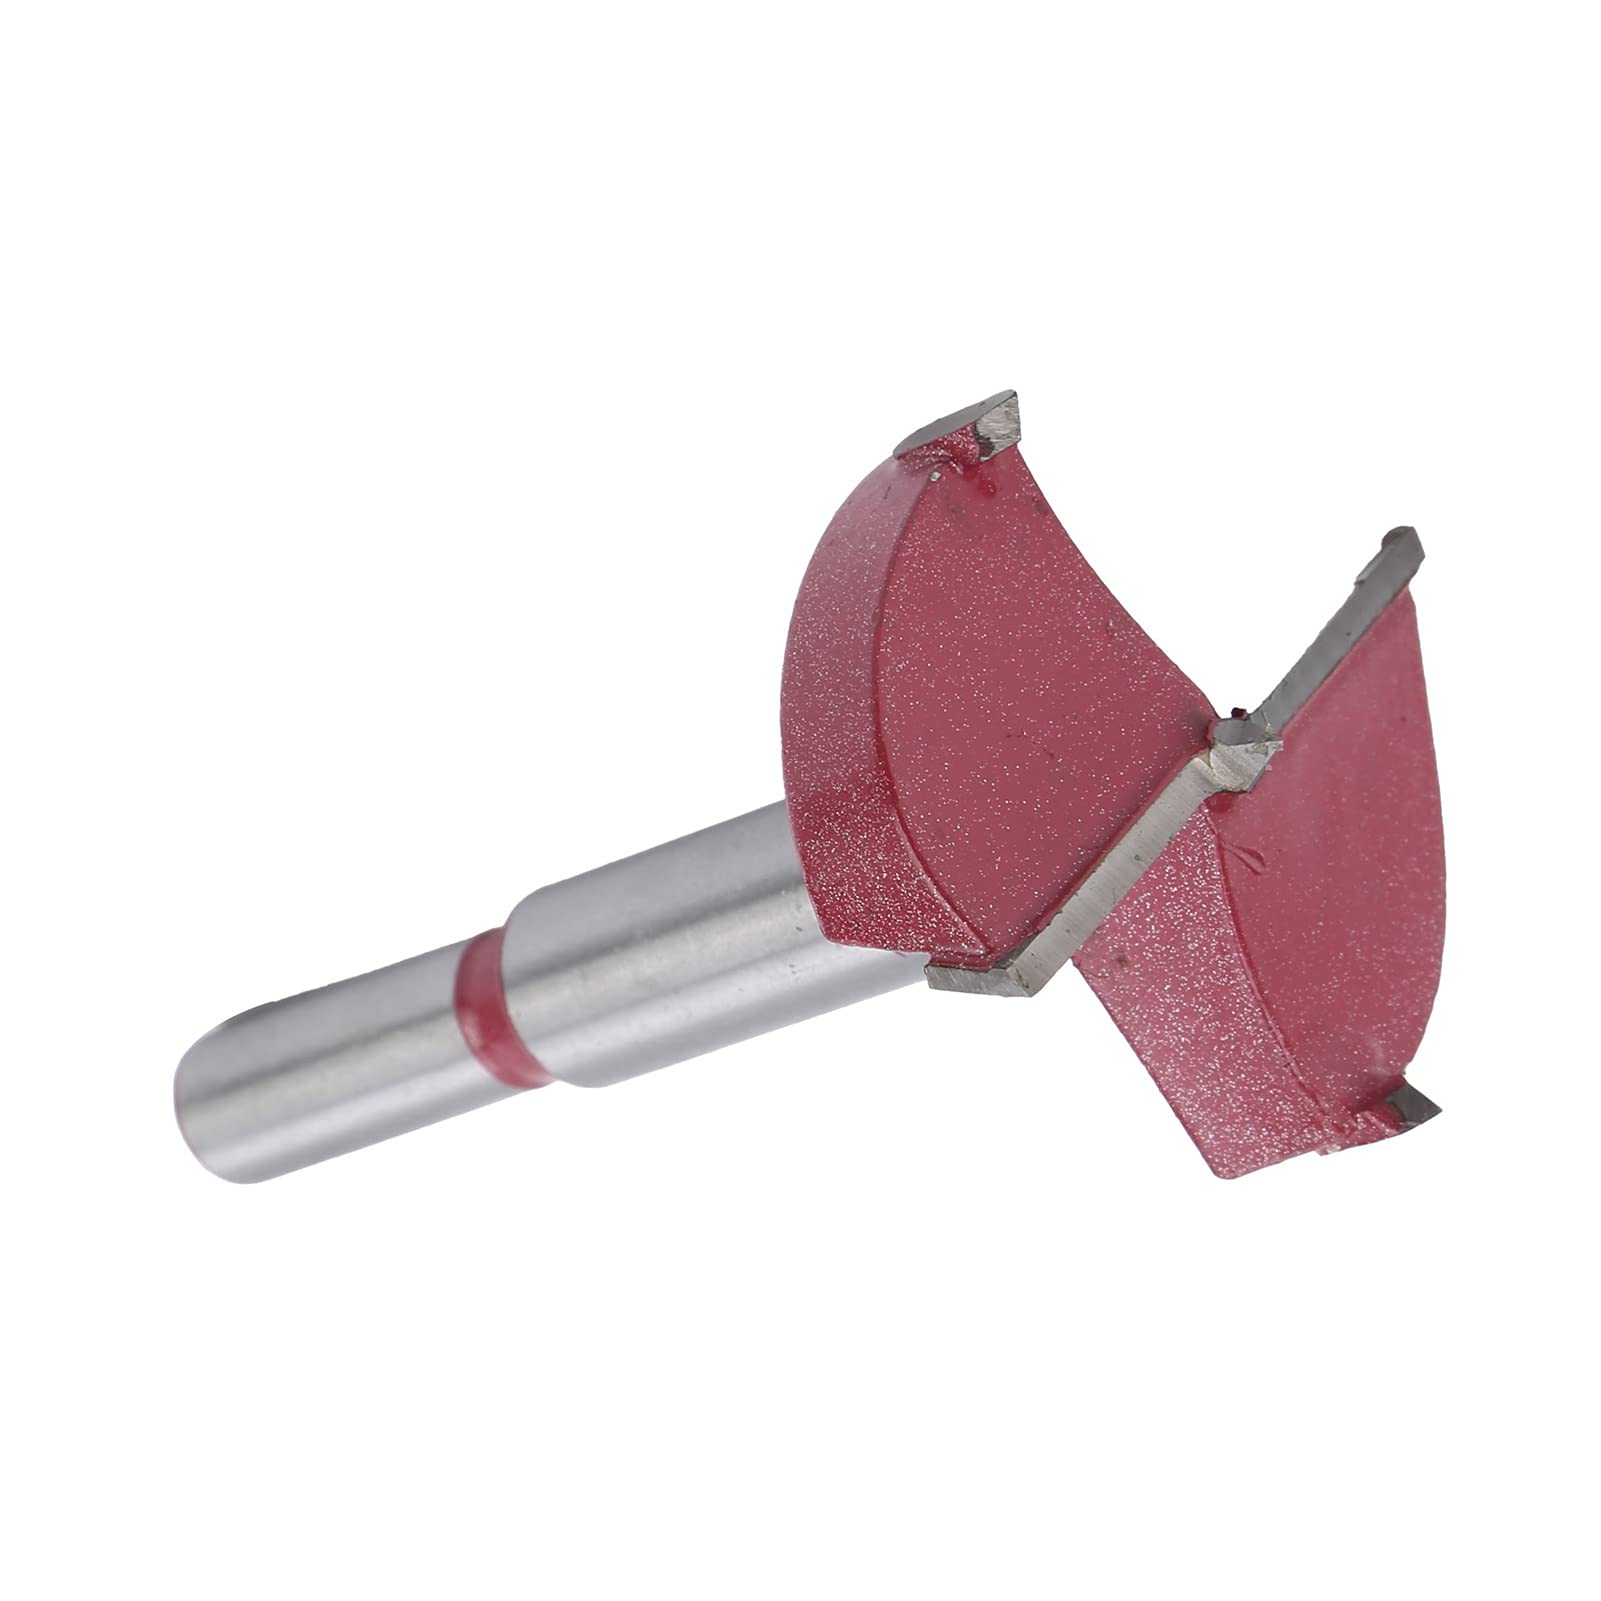 Wood Drilling,Wood Hole Opener Drill Bit 45mm Woodworking Cutter Auger Round Shank Drilling Tool